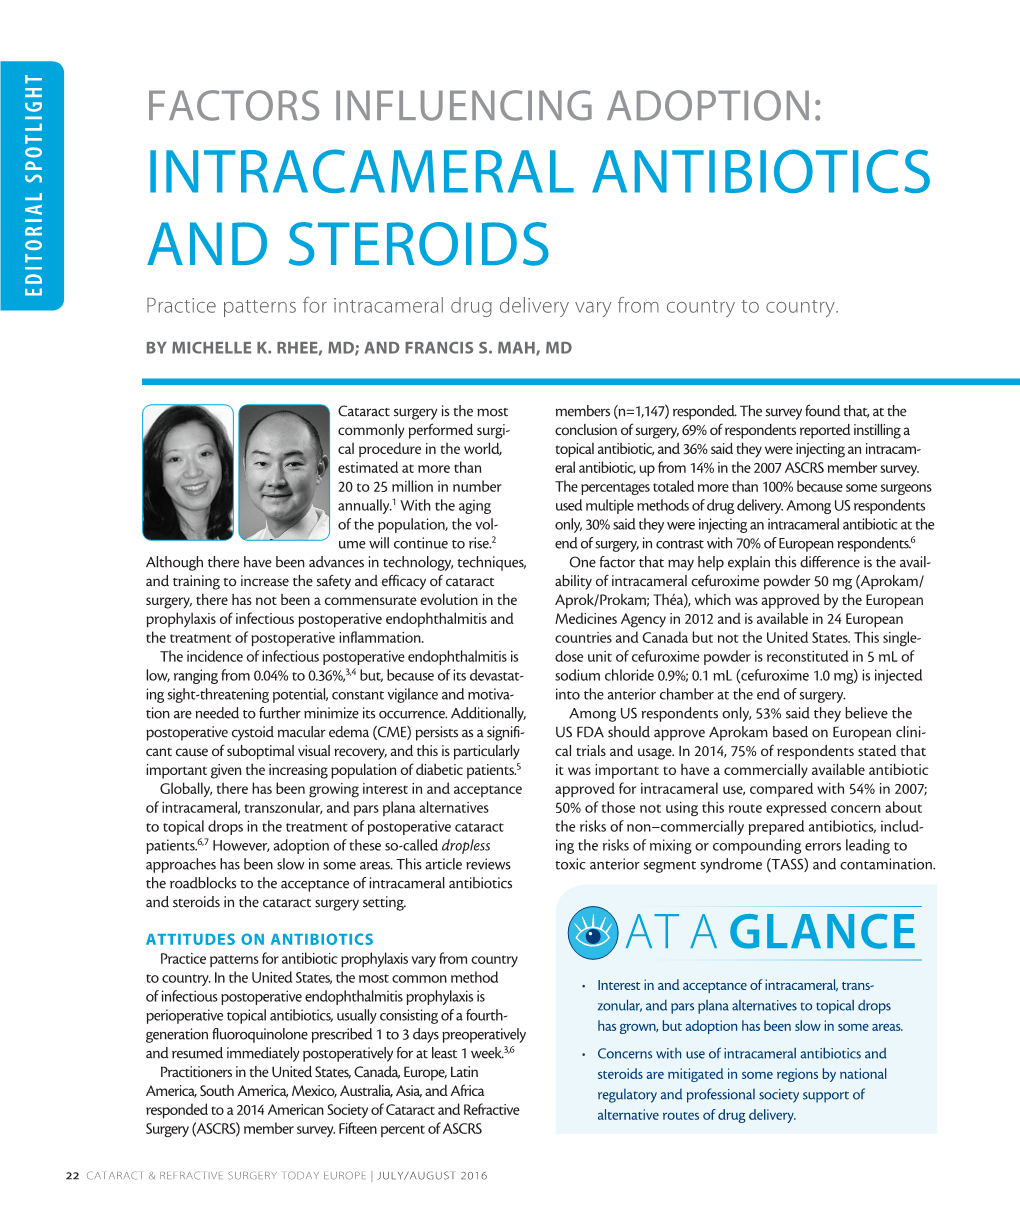 INTRACAMERAL ANTIBIOTICS and STEROIDS EDITORIAL SPOTLIGHT EDITORIAL Practice Patterns for Intracameral Drug Delivery Vary from Country to Country